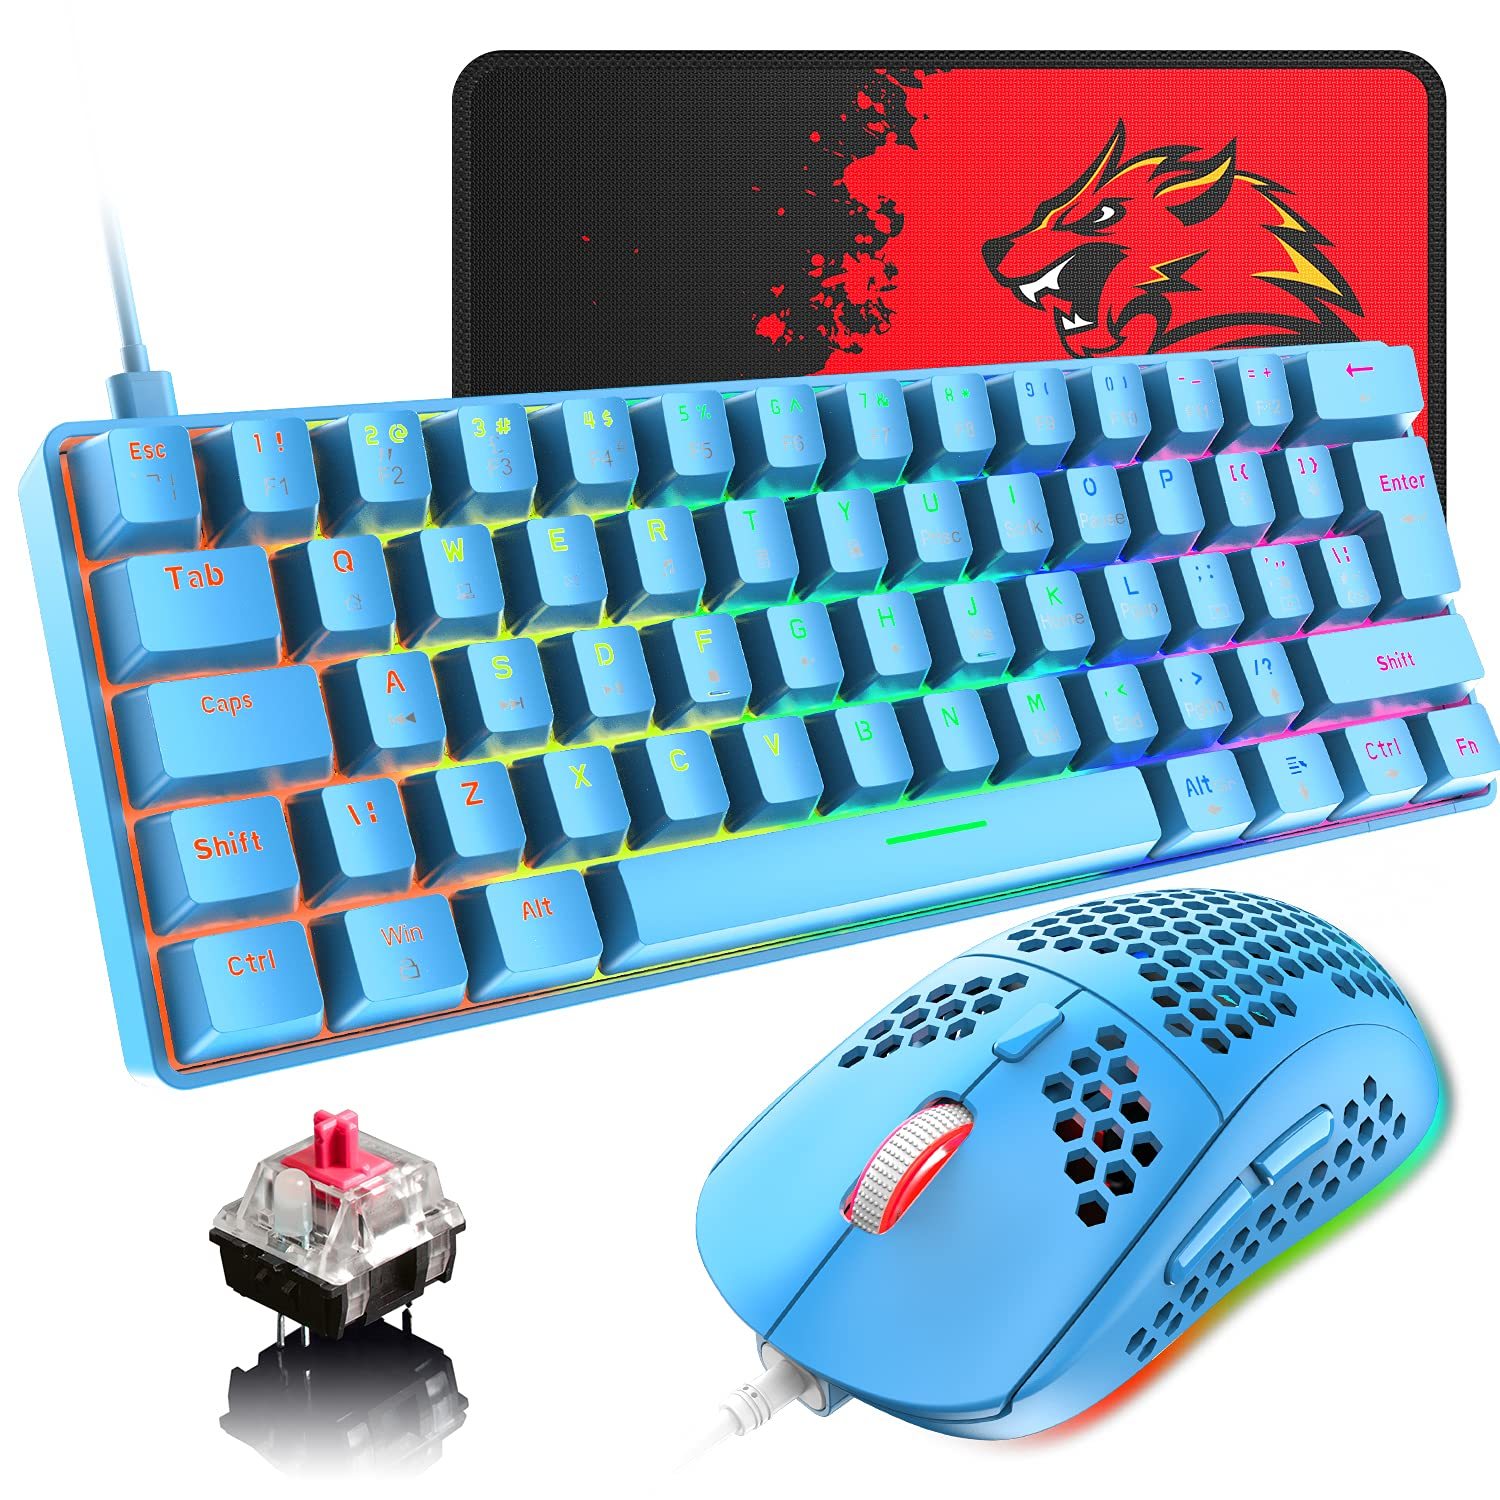 60% Wired Mechanical Gaming Keyboard And Mouse Combo, Ultra-Compact Mini 62 Keys